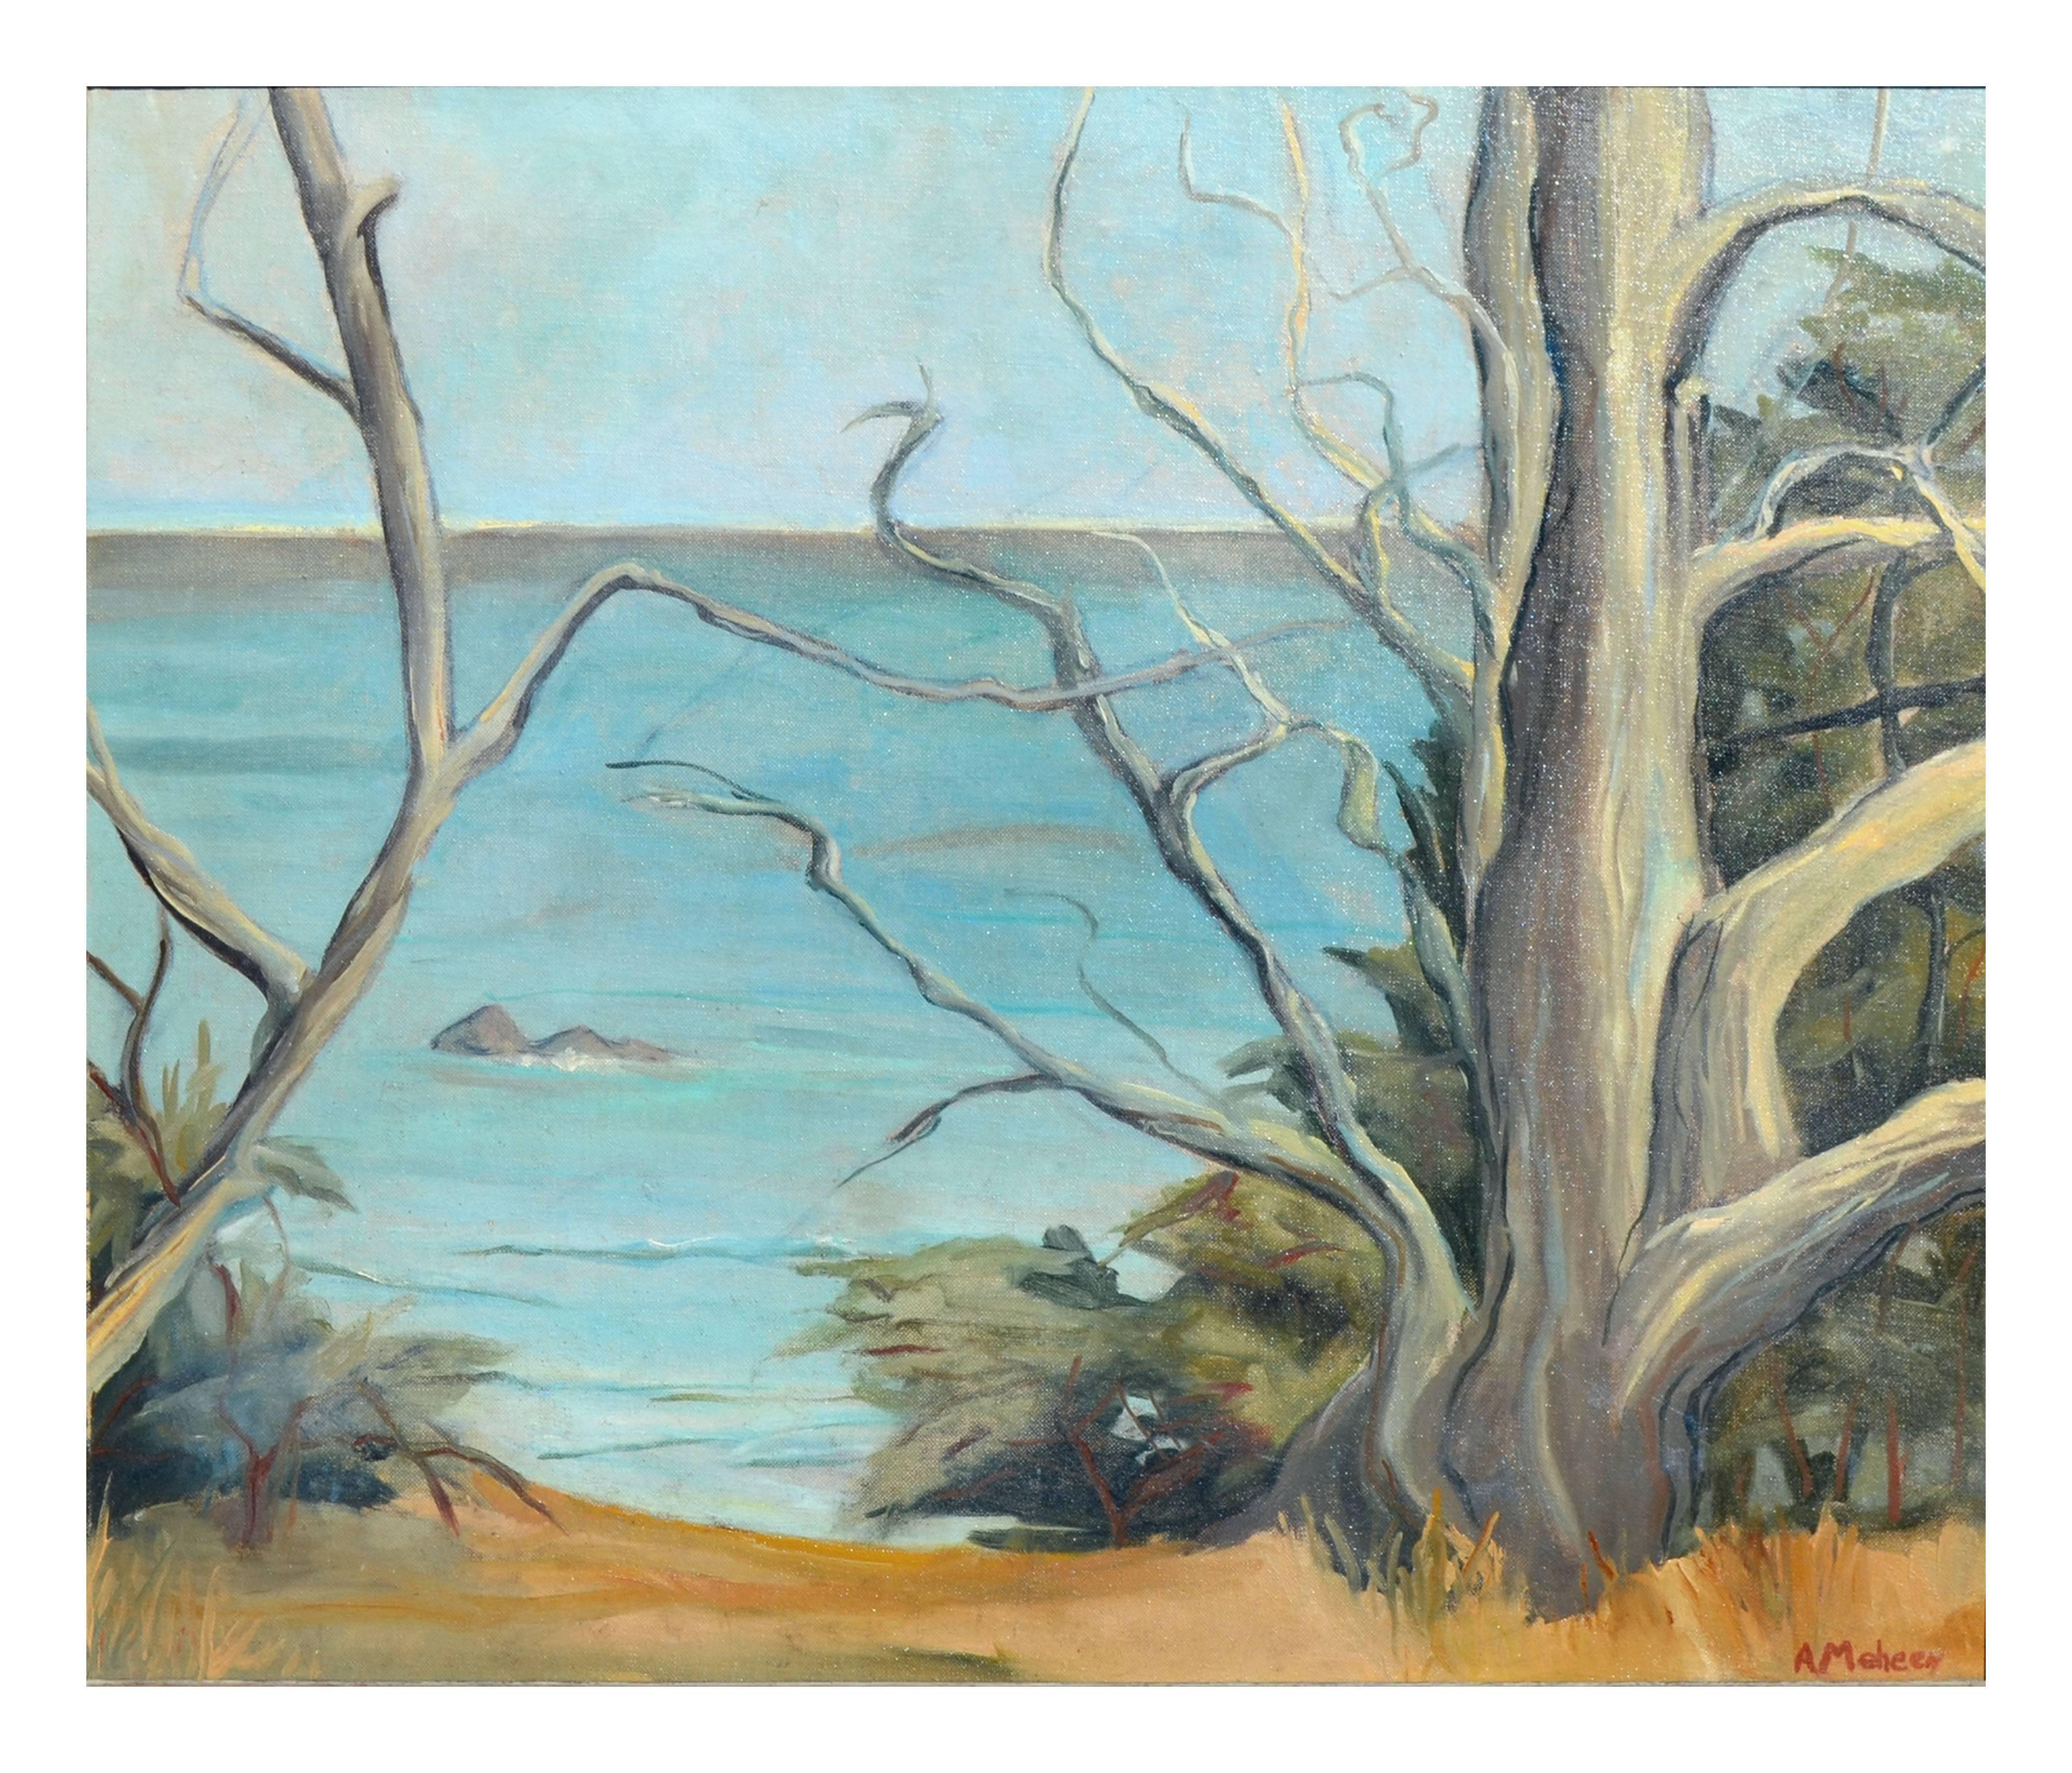 Vintage Monterey California Landscape -- Along the Shore - Painting by Alicia Meheen